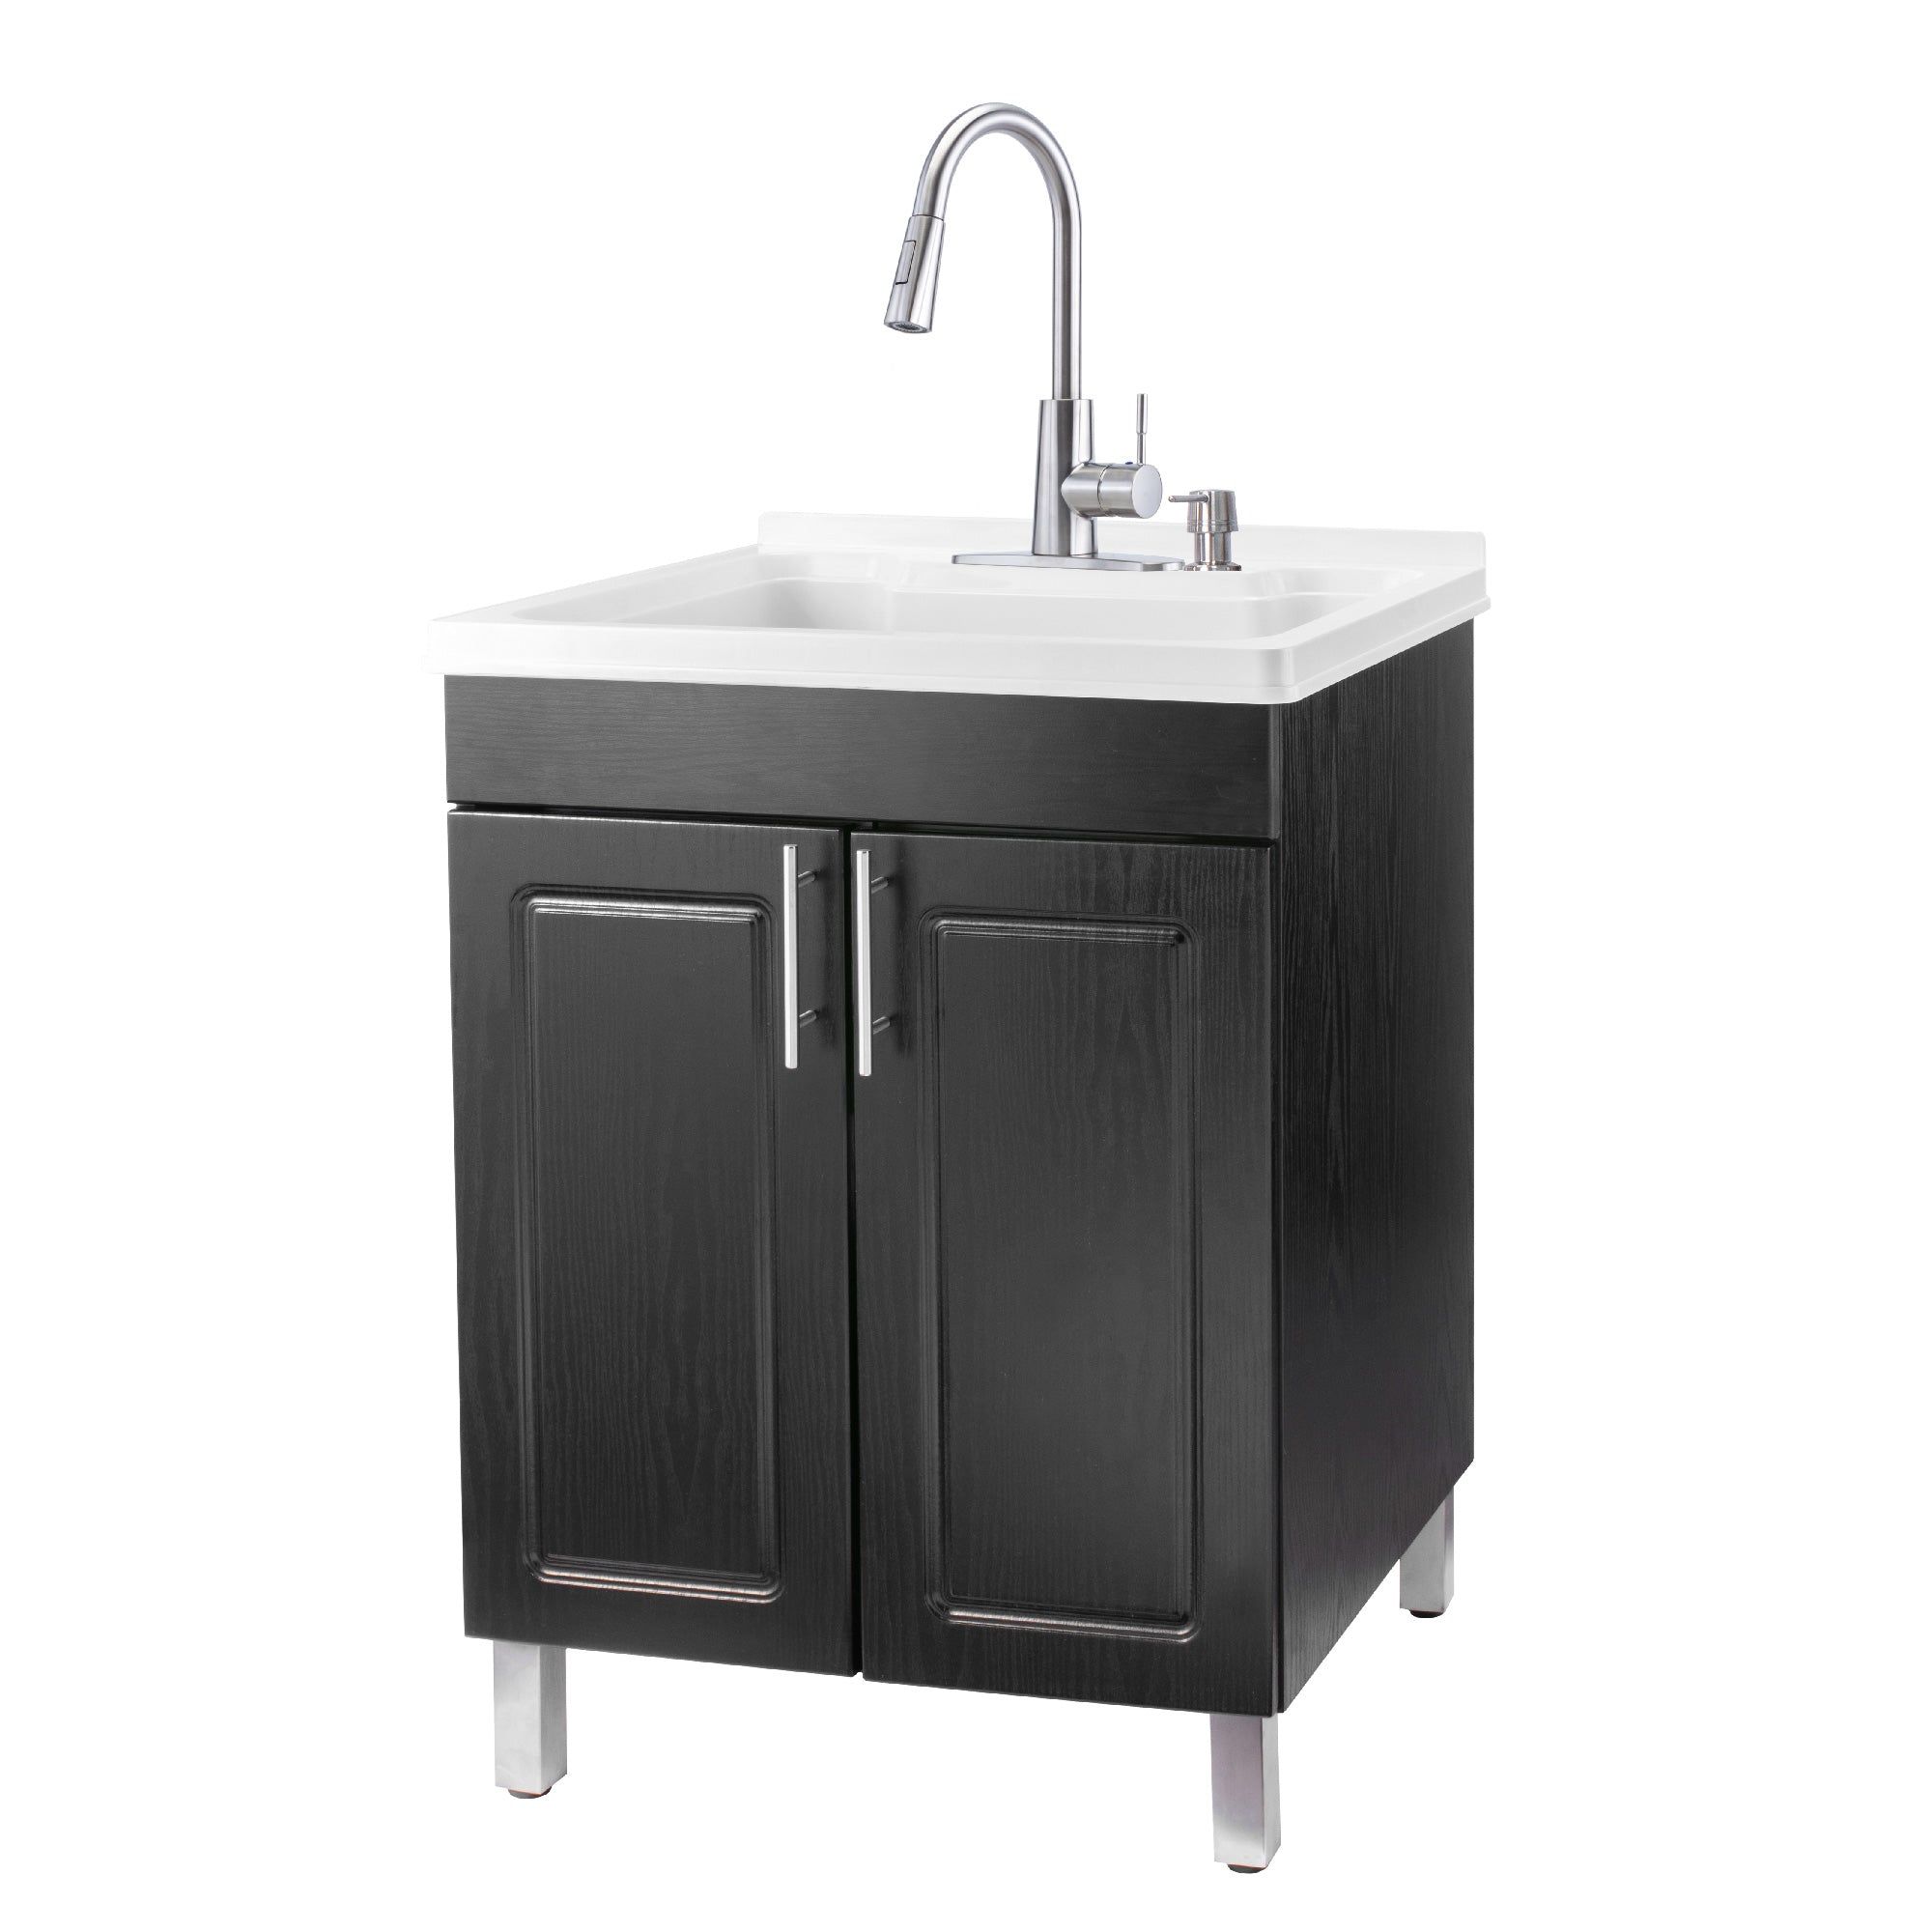 Tehila Black Vanity Cabinet and White Utility Sink with Stainless Steel  Finish High-Arc Pull-Down Faucet